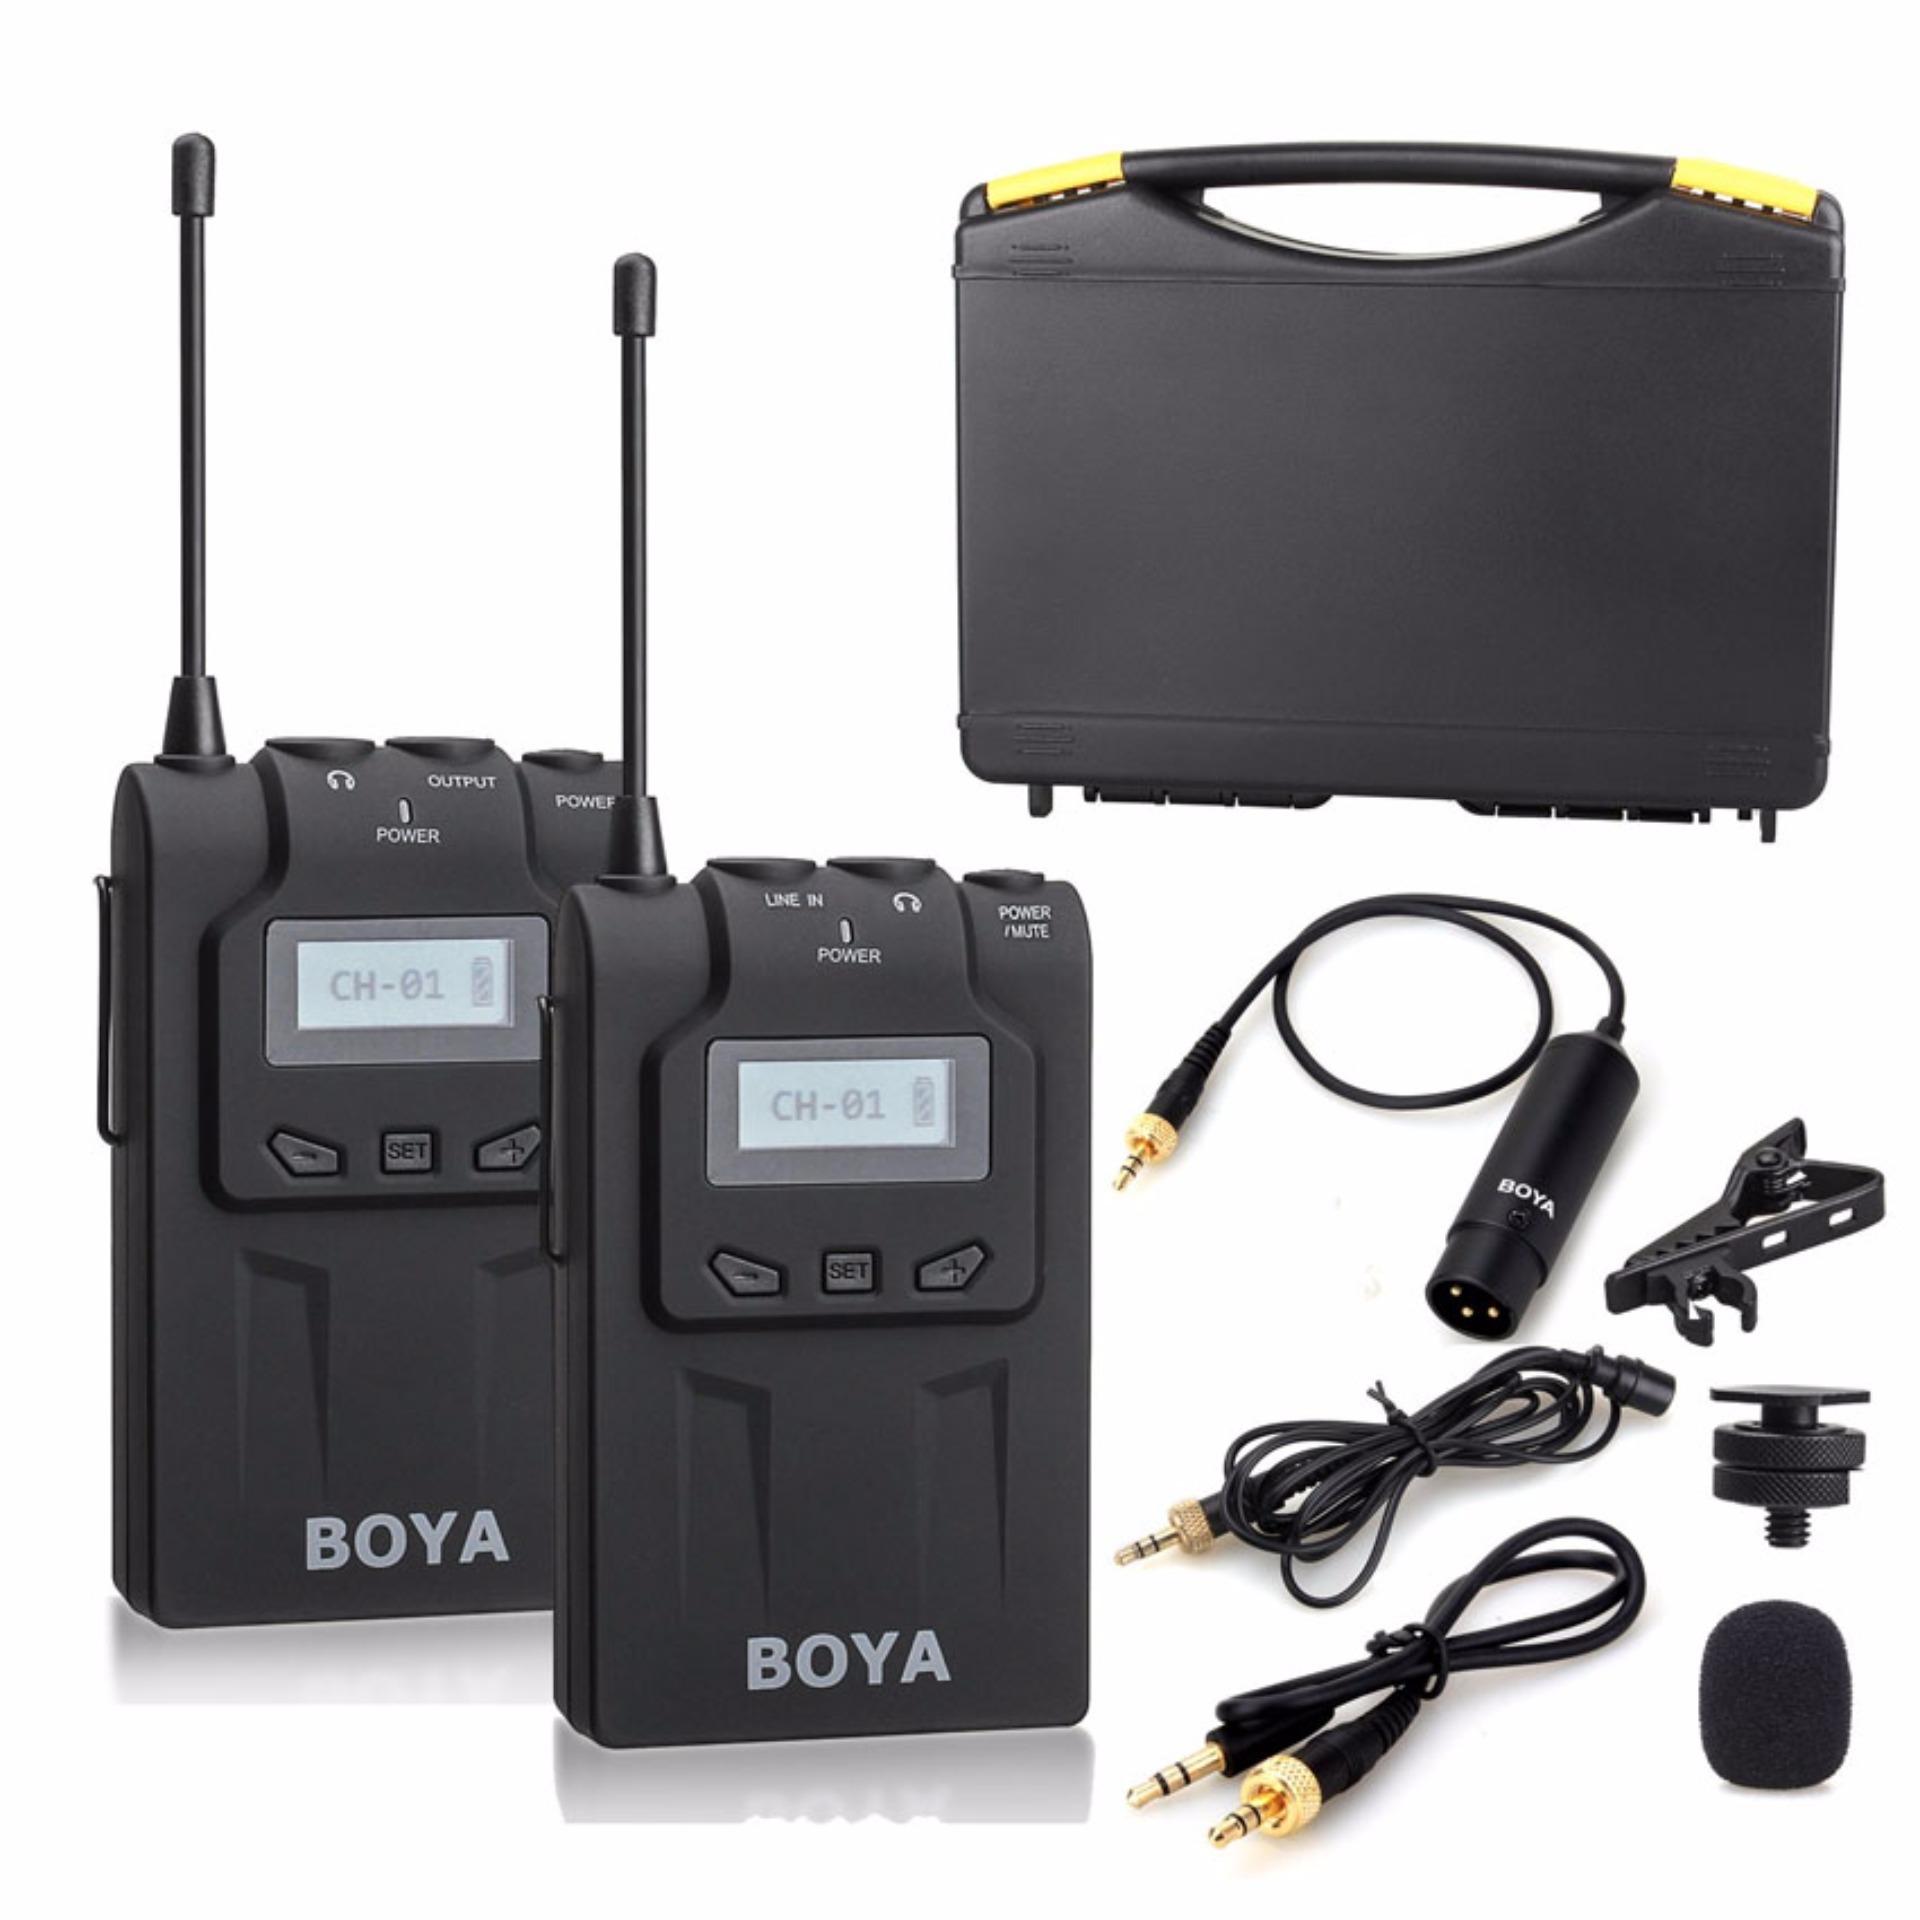 BOYA BY-WM6, Professional UHF Wireless Microphone for ENG, EFP, DSLR video, and other professional applications